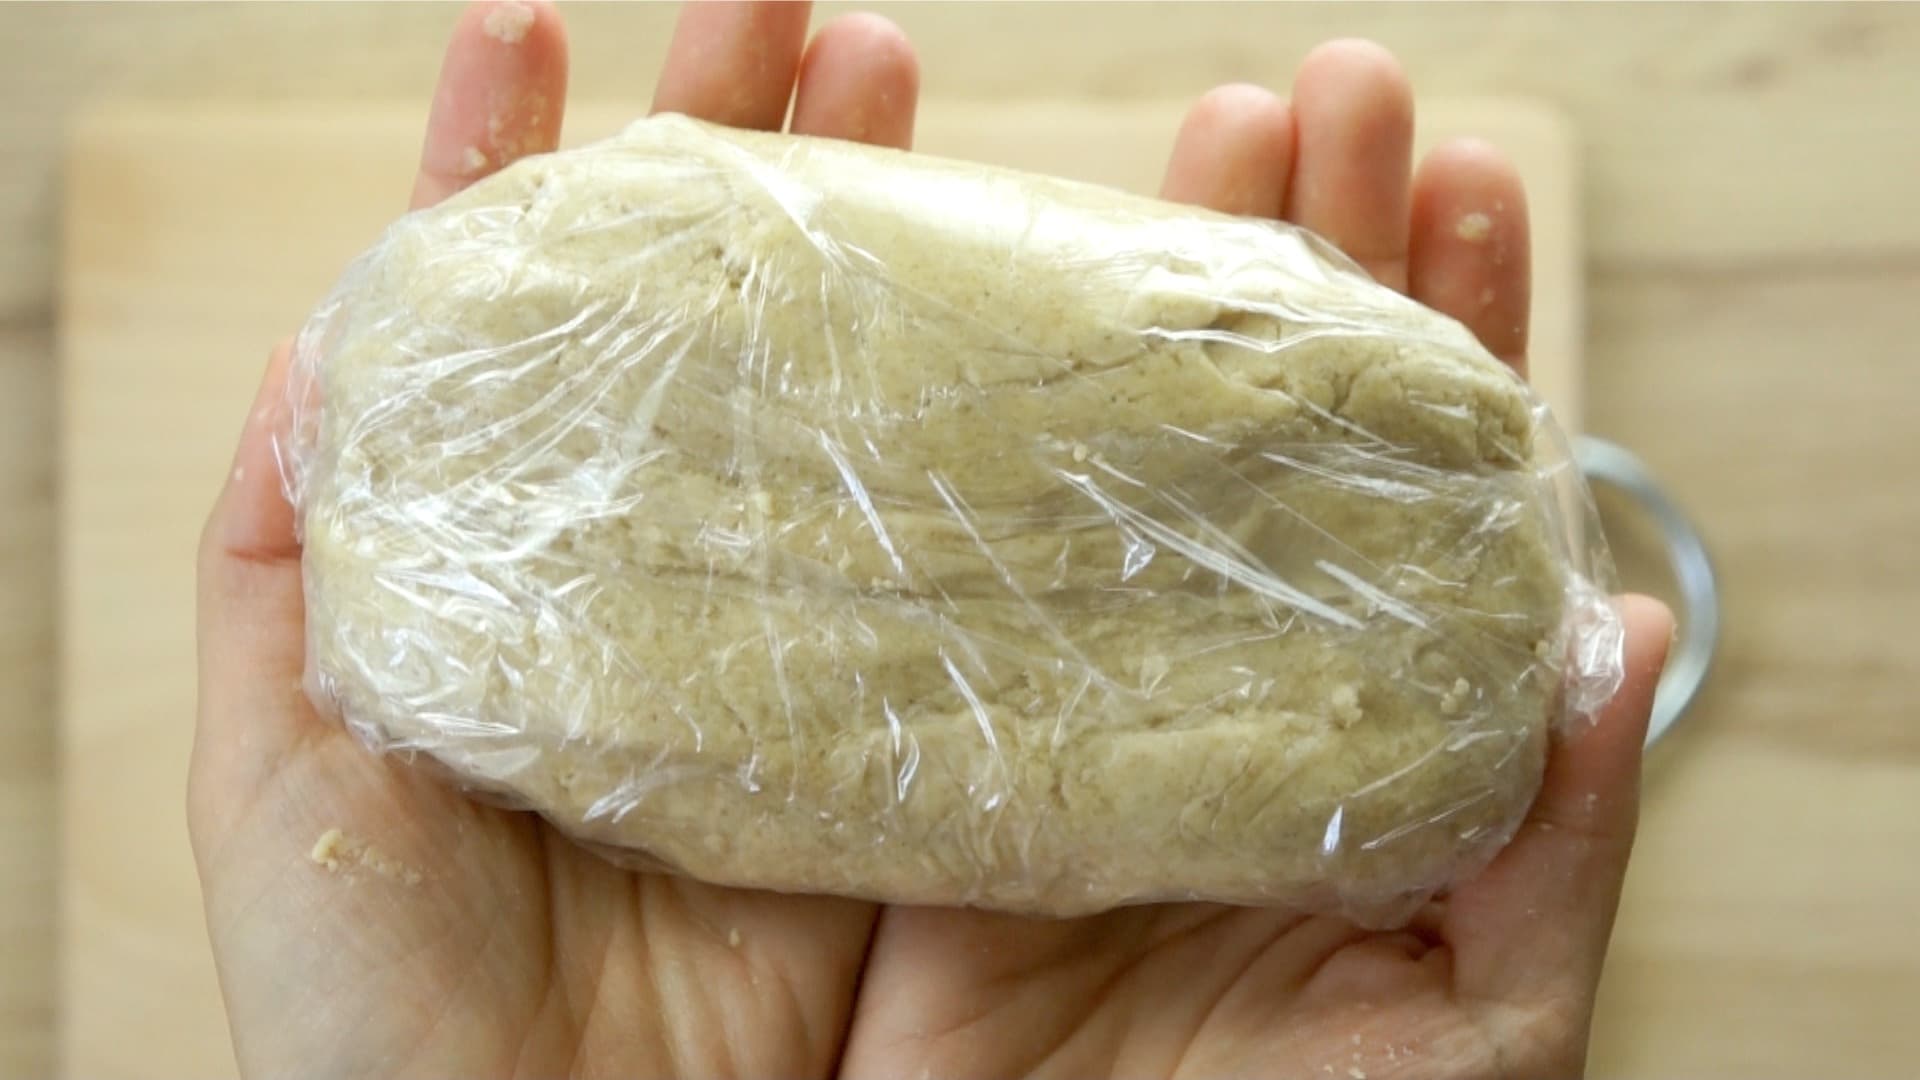 Hands are holding a dough shaped like a brick wrapped in plastic wrap.